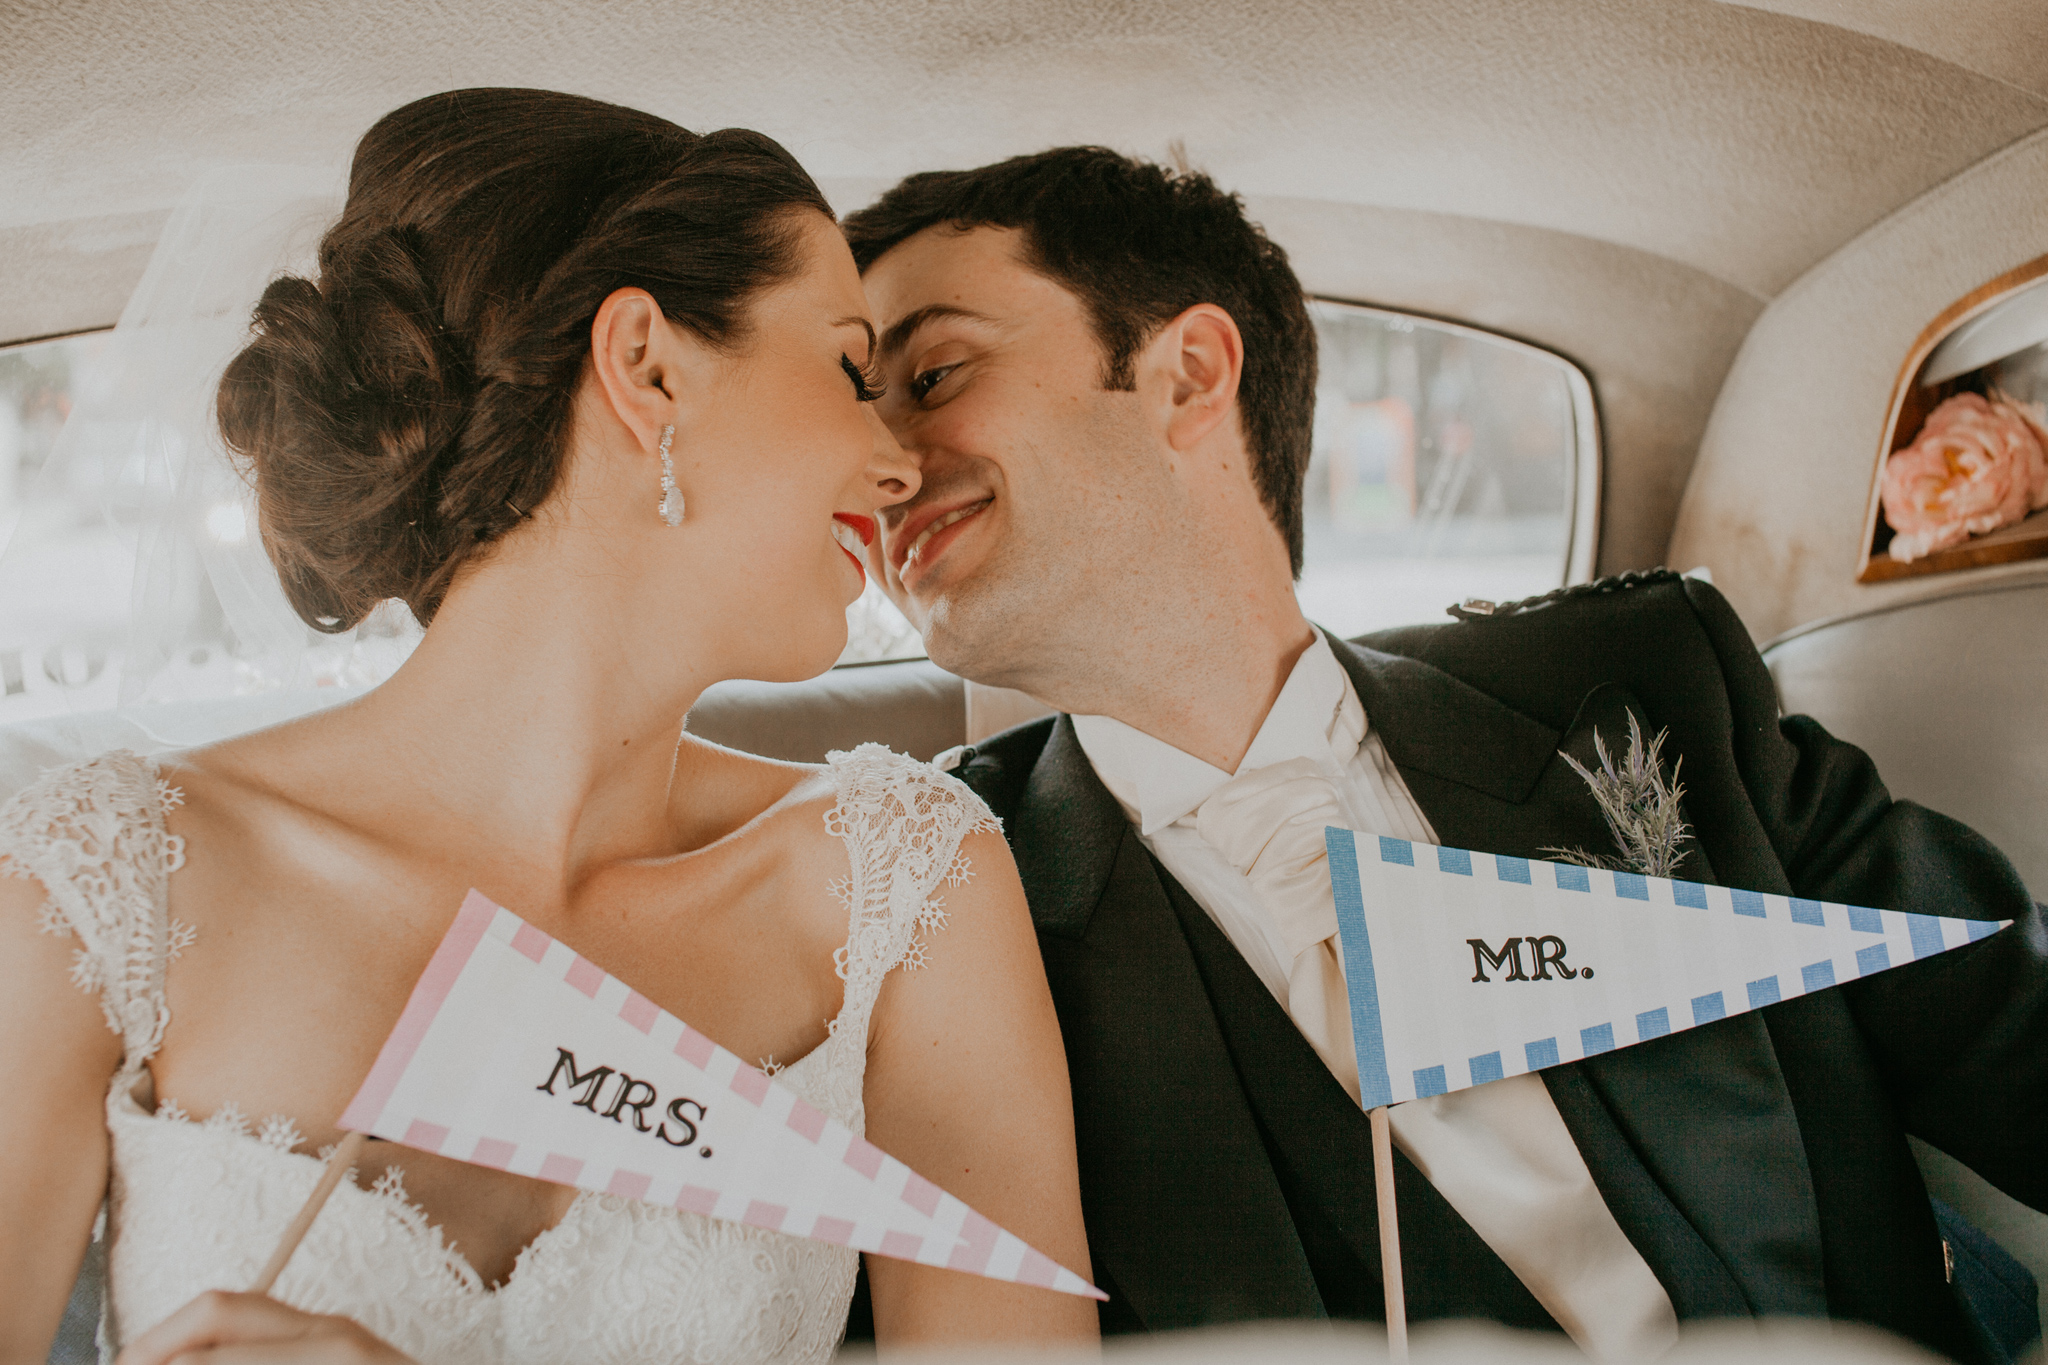 Couple of bride and groom kissing in car